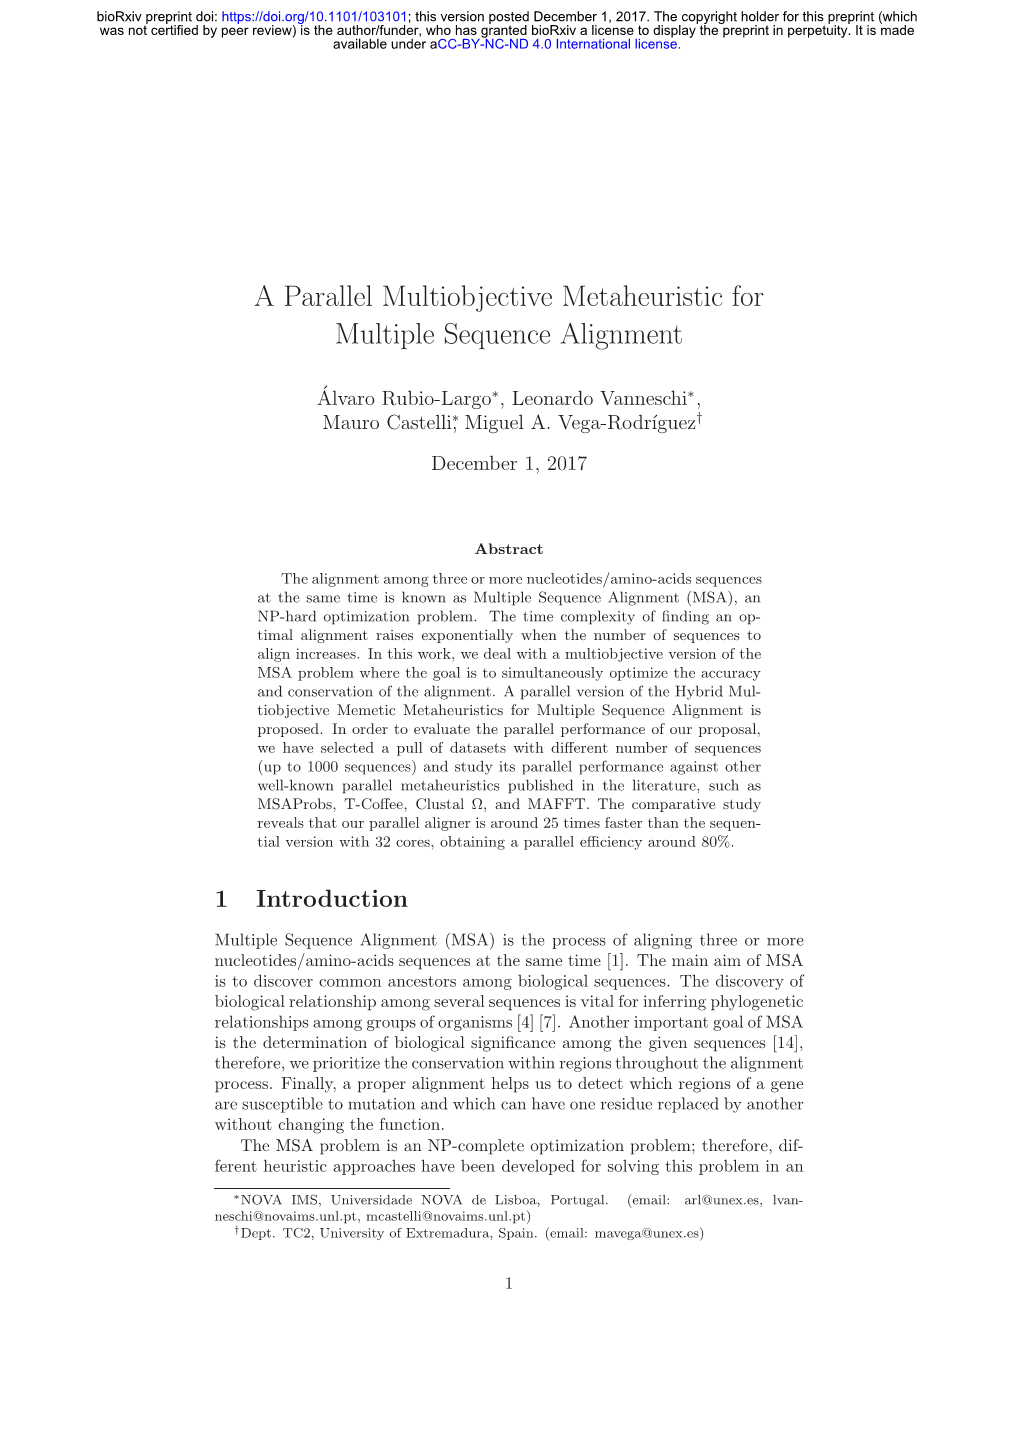 A Parallel Multiobjective Metaheuristic for Multiple Sequence Alignment